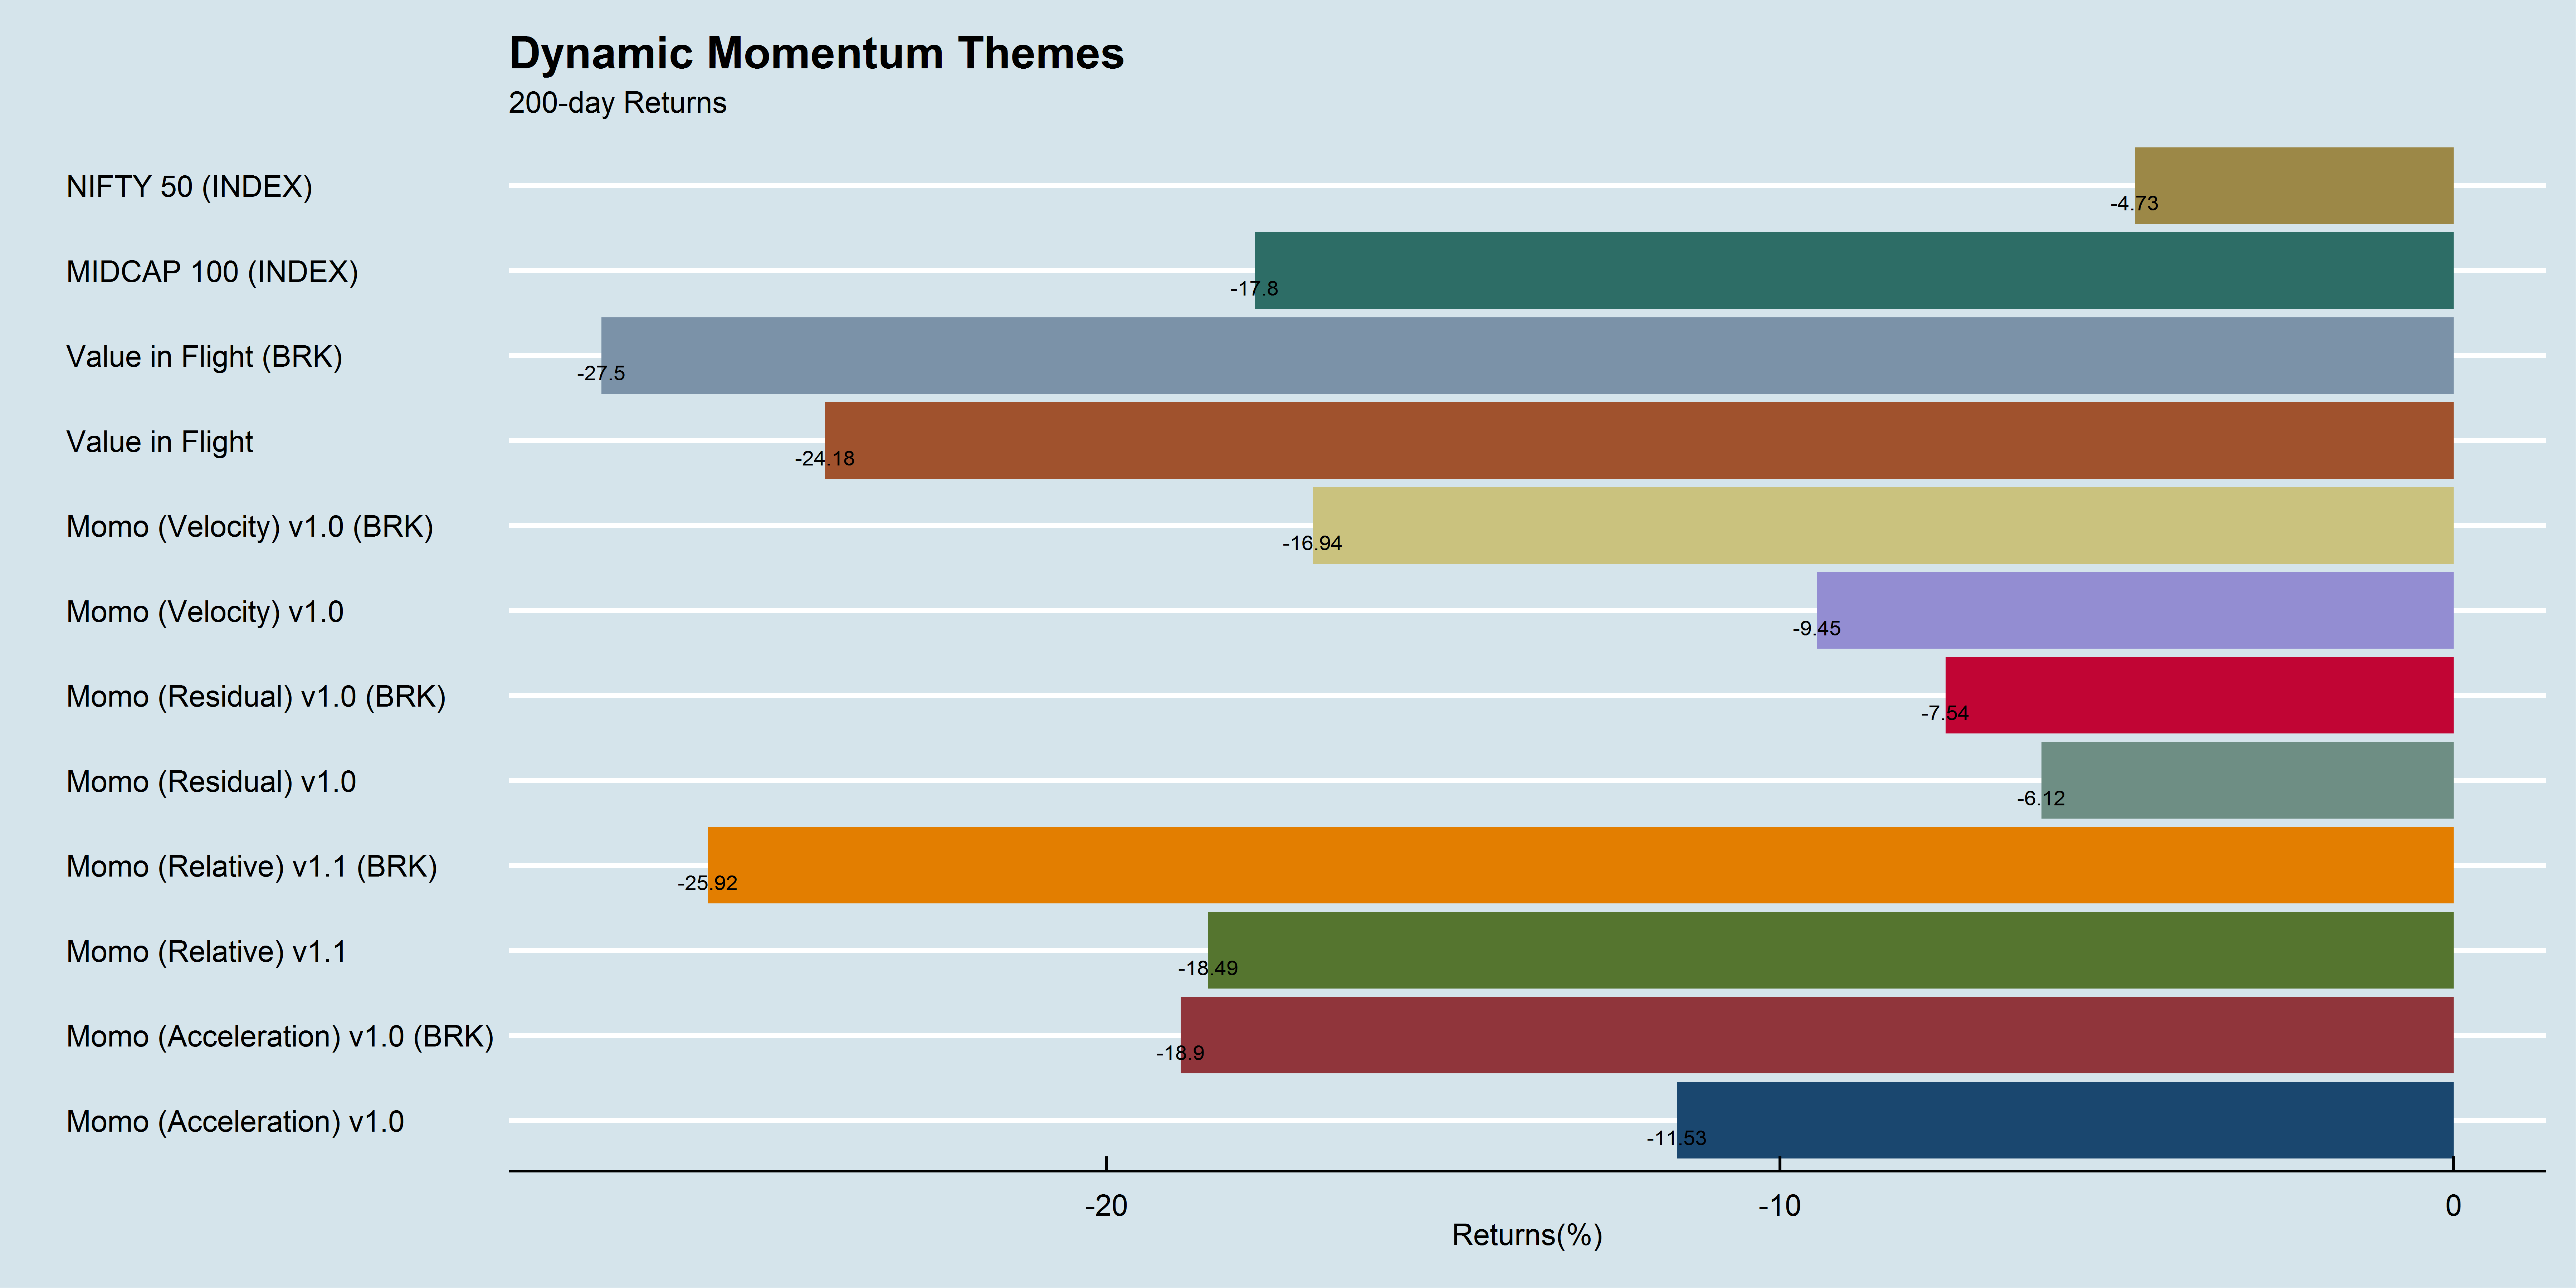 Dynamic Momentum Themes 200-day performance